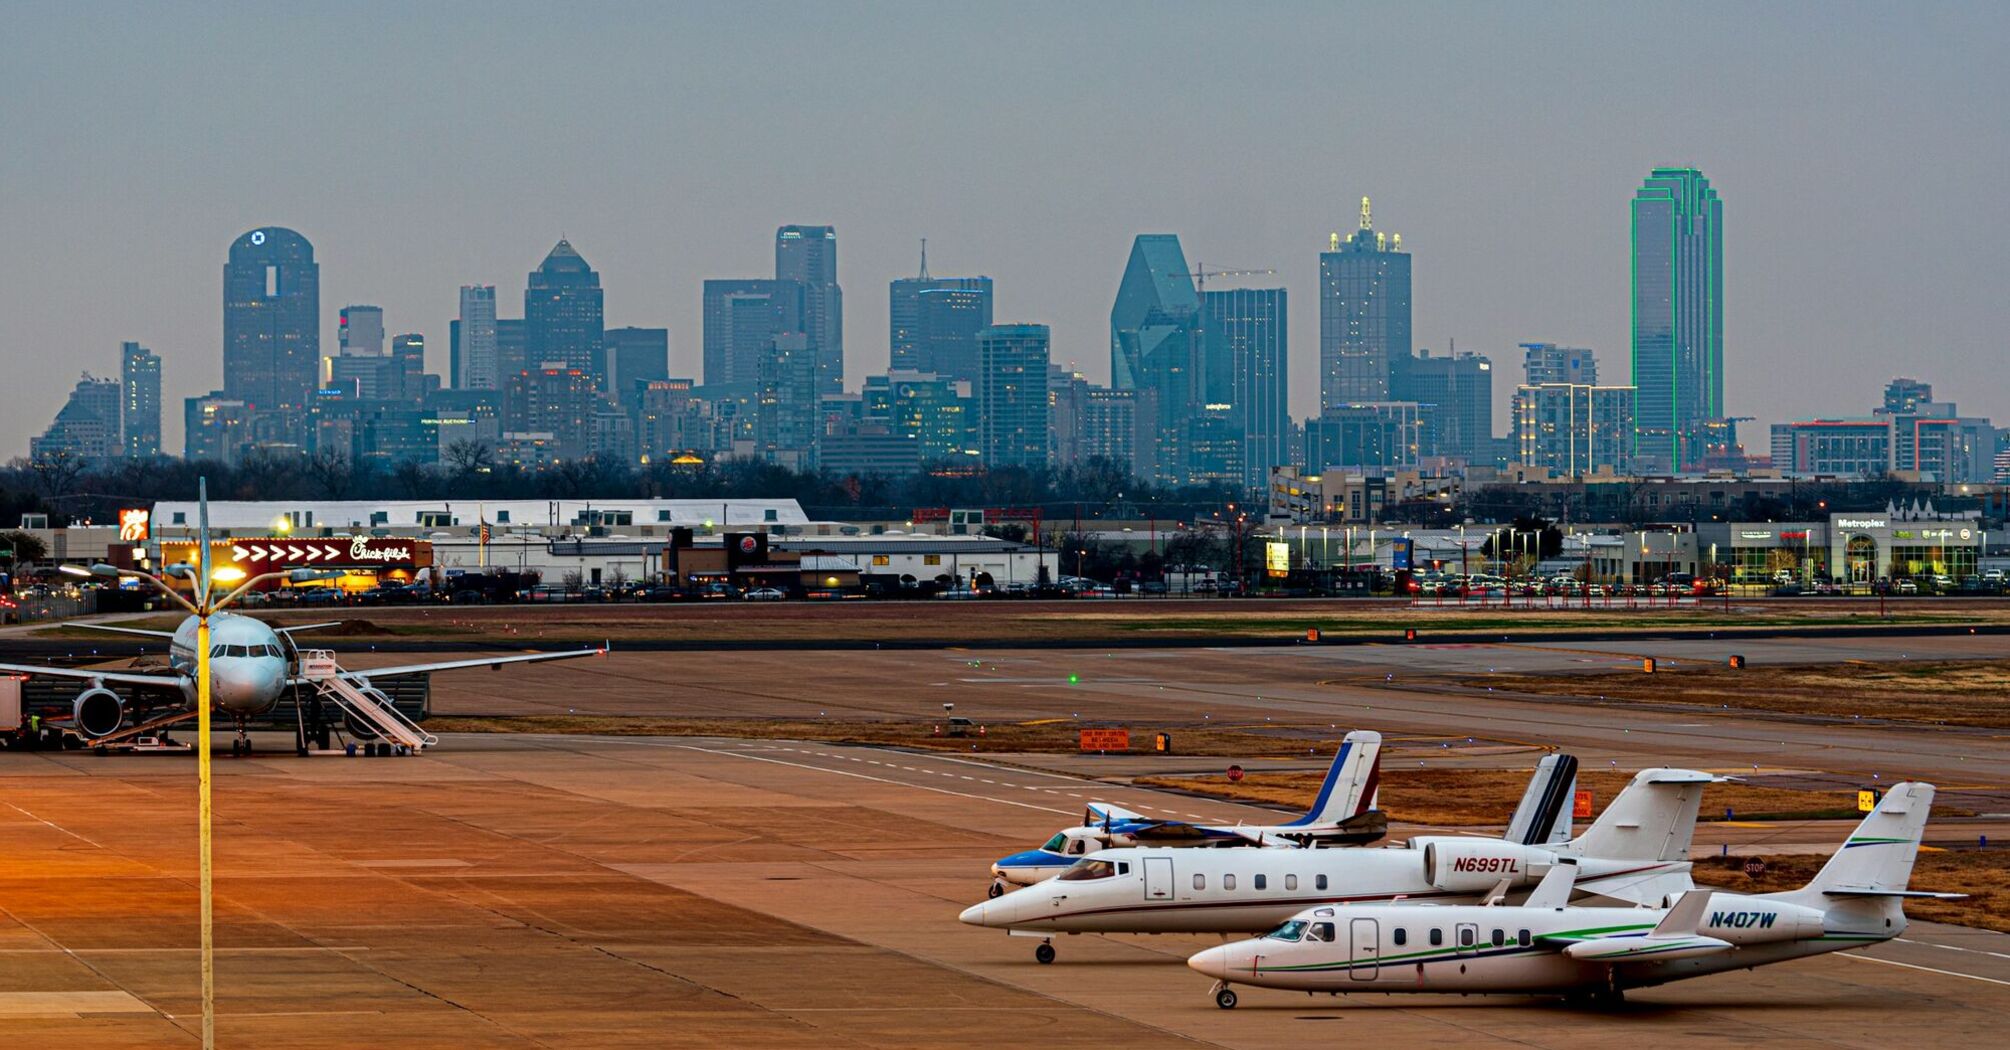 View of Dallas Love Field airport foreground with planes on tarmac and Dallas skyline in background during twilight